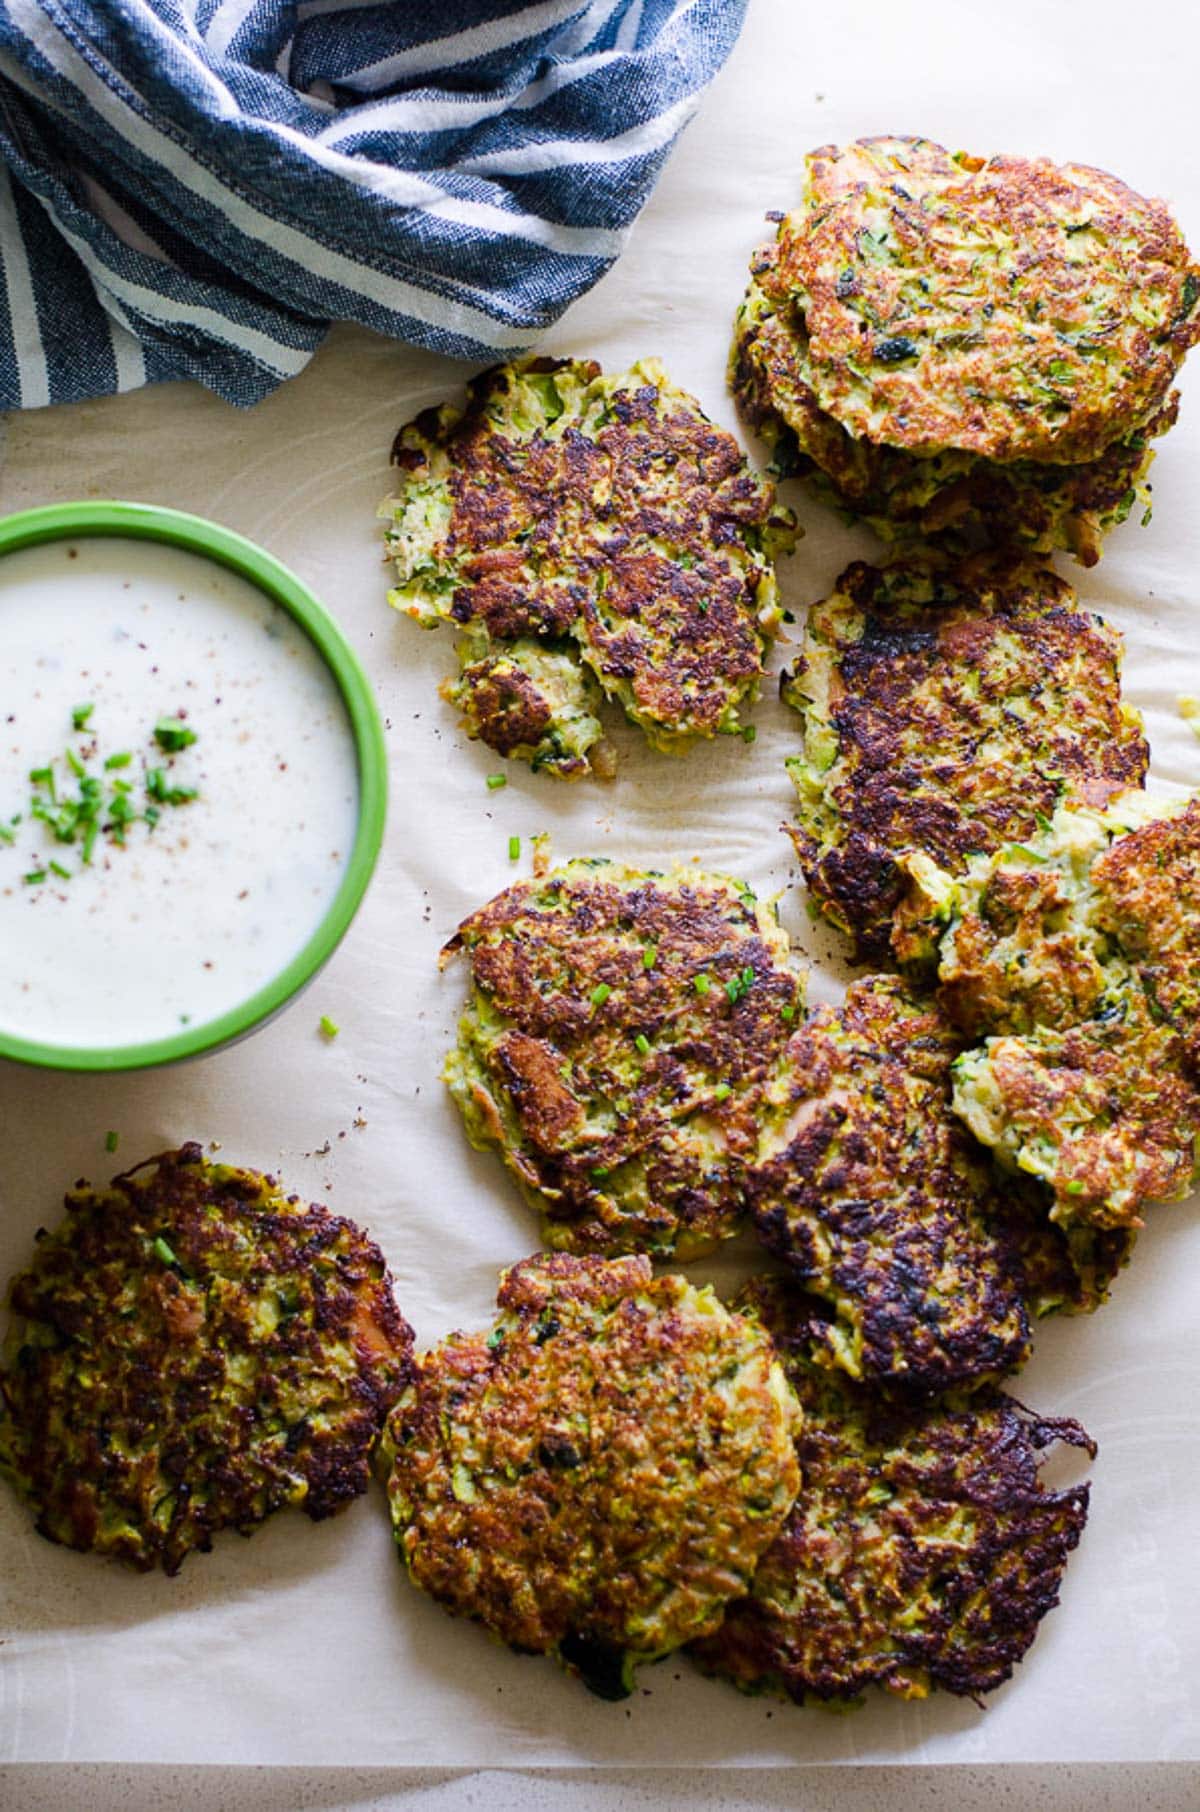 Fried zucchini cakes served with creamy dipping sauce and garnished with chives.